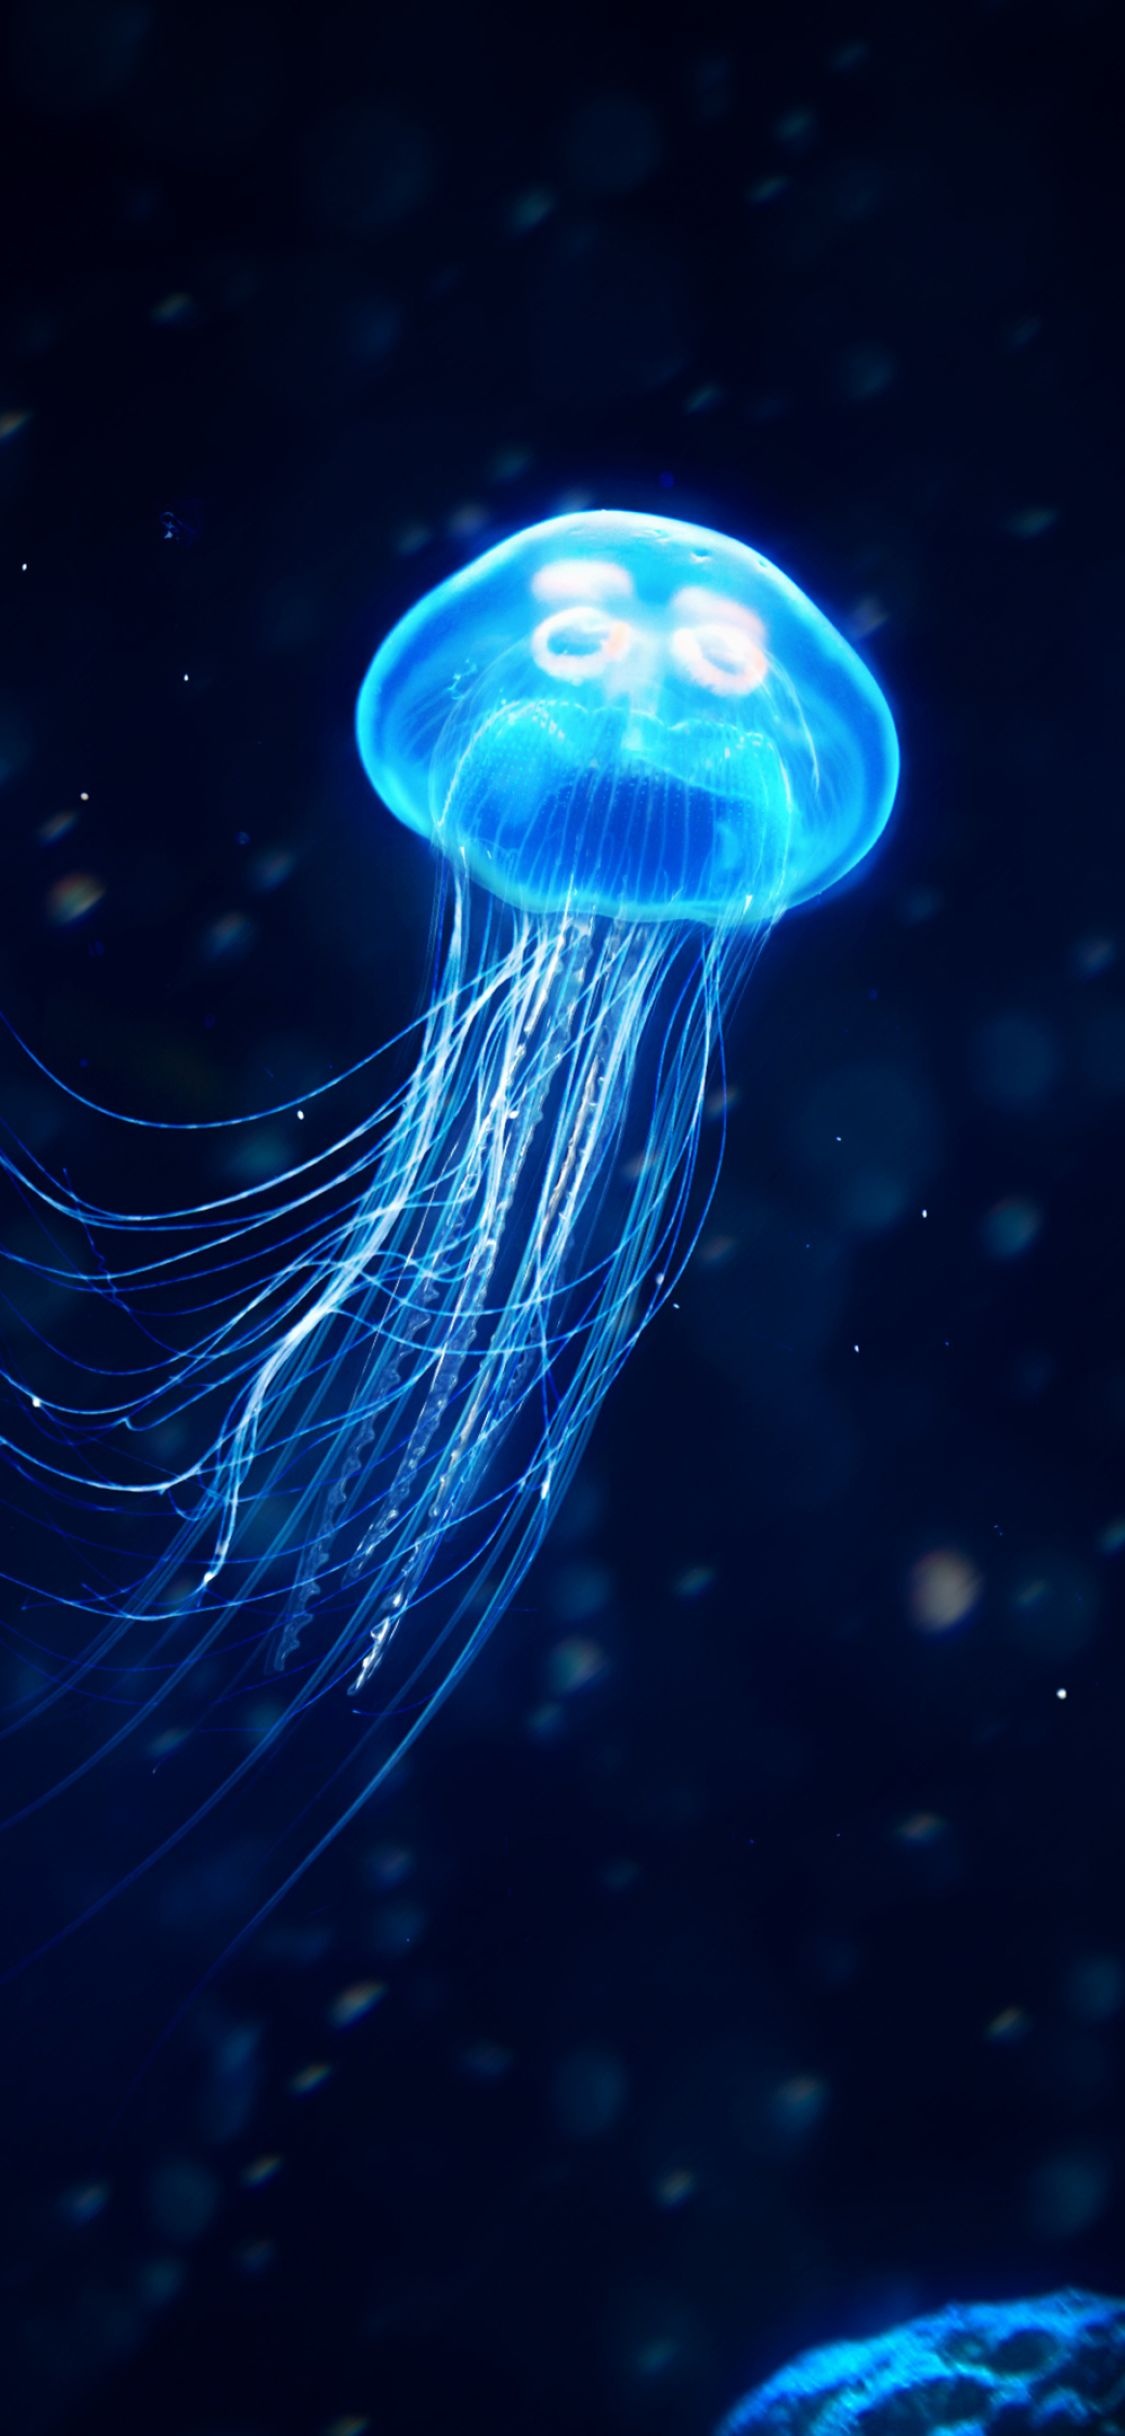 Phone wallpapers of jellyfish, Mobile marvels, Jellyfish backgrounds, Underwater elegance, 1130x2440 HD Phone